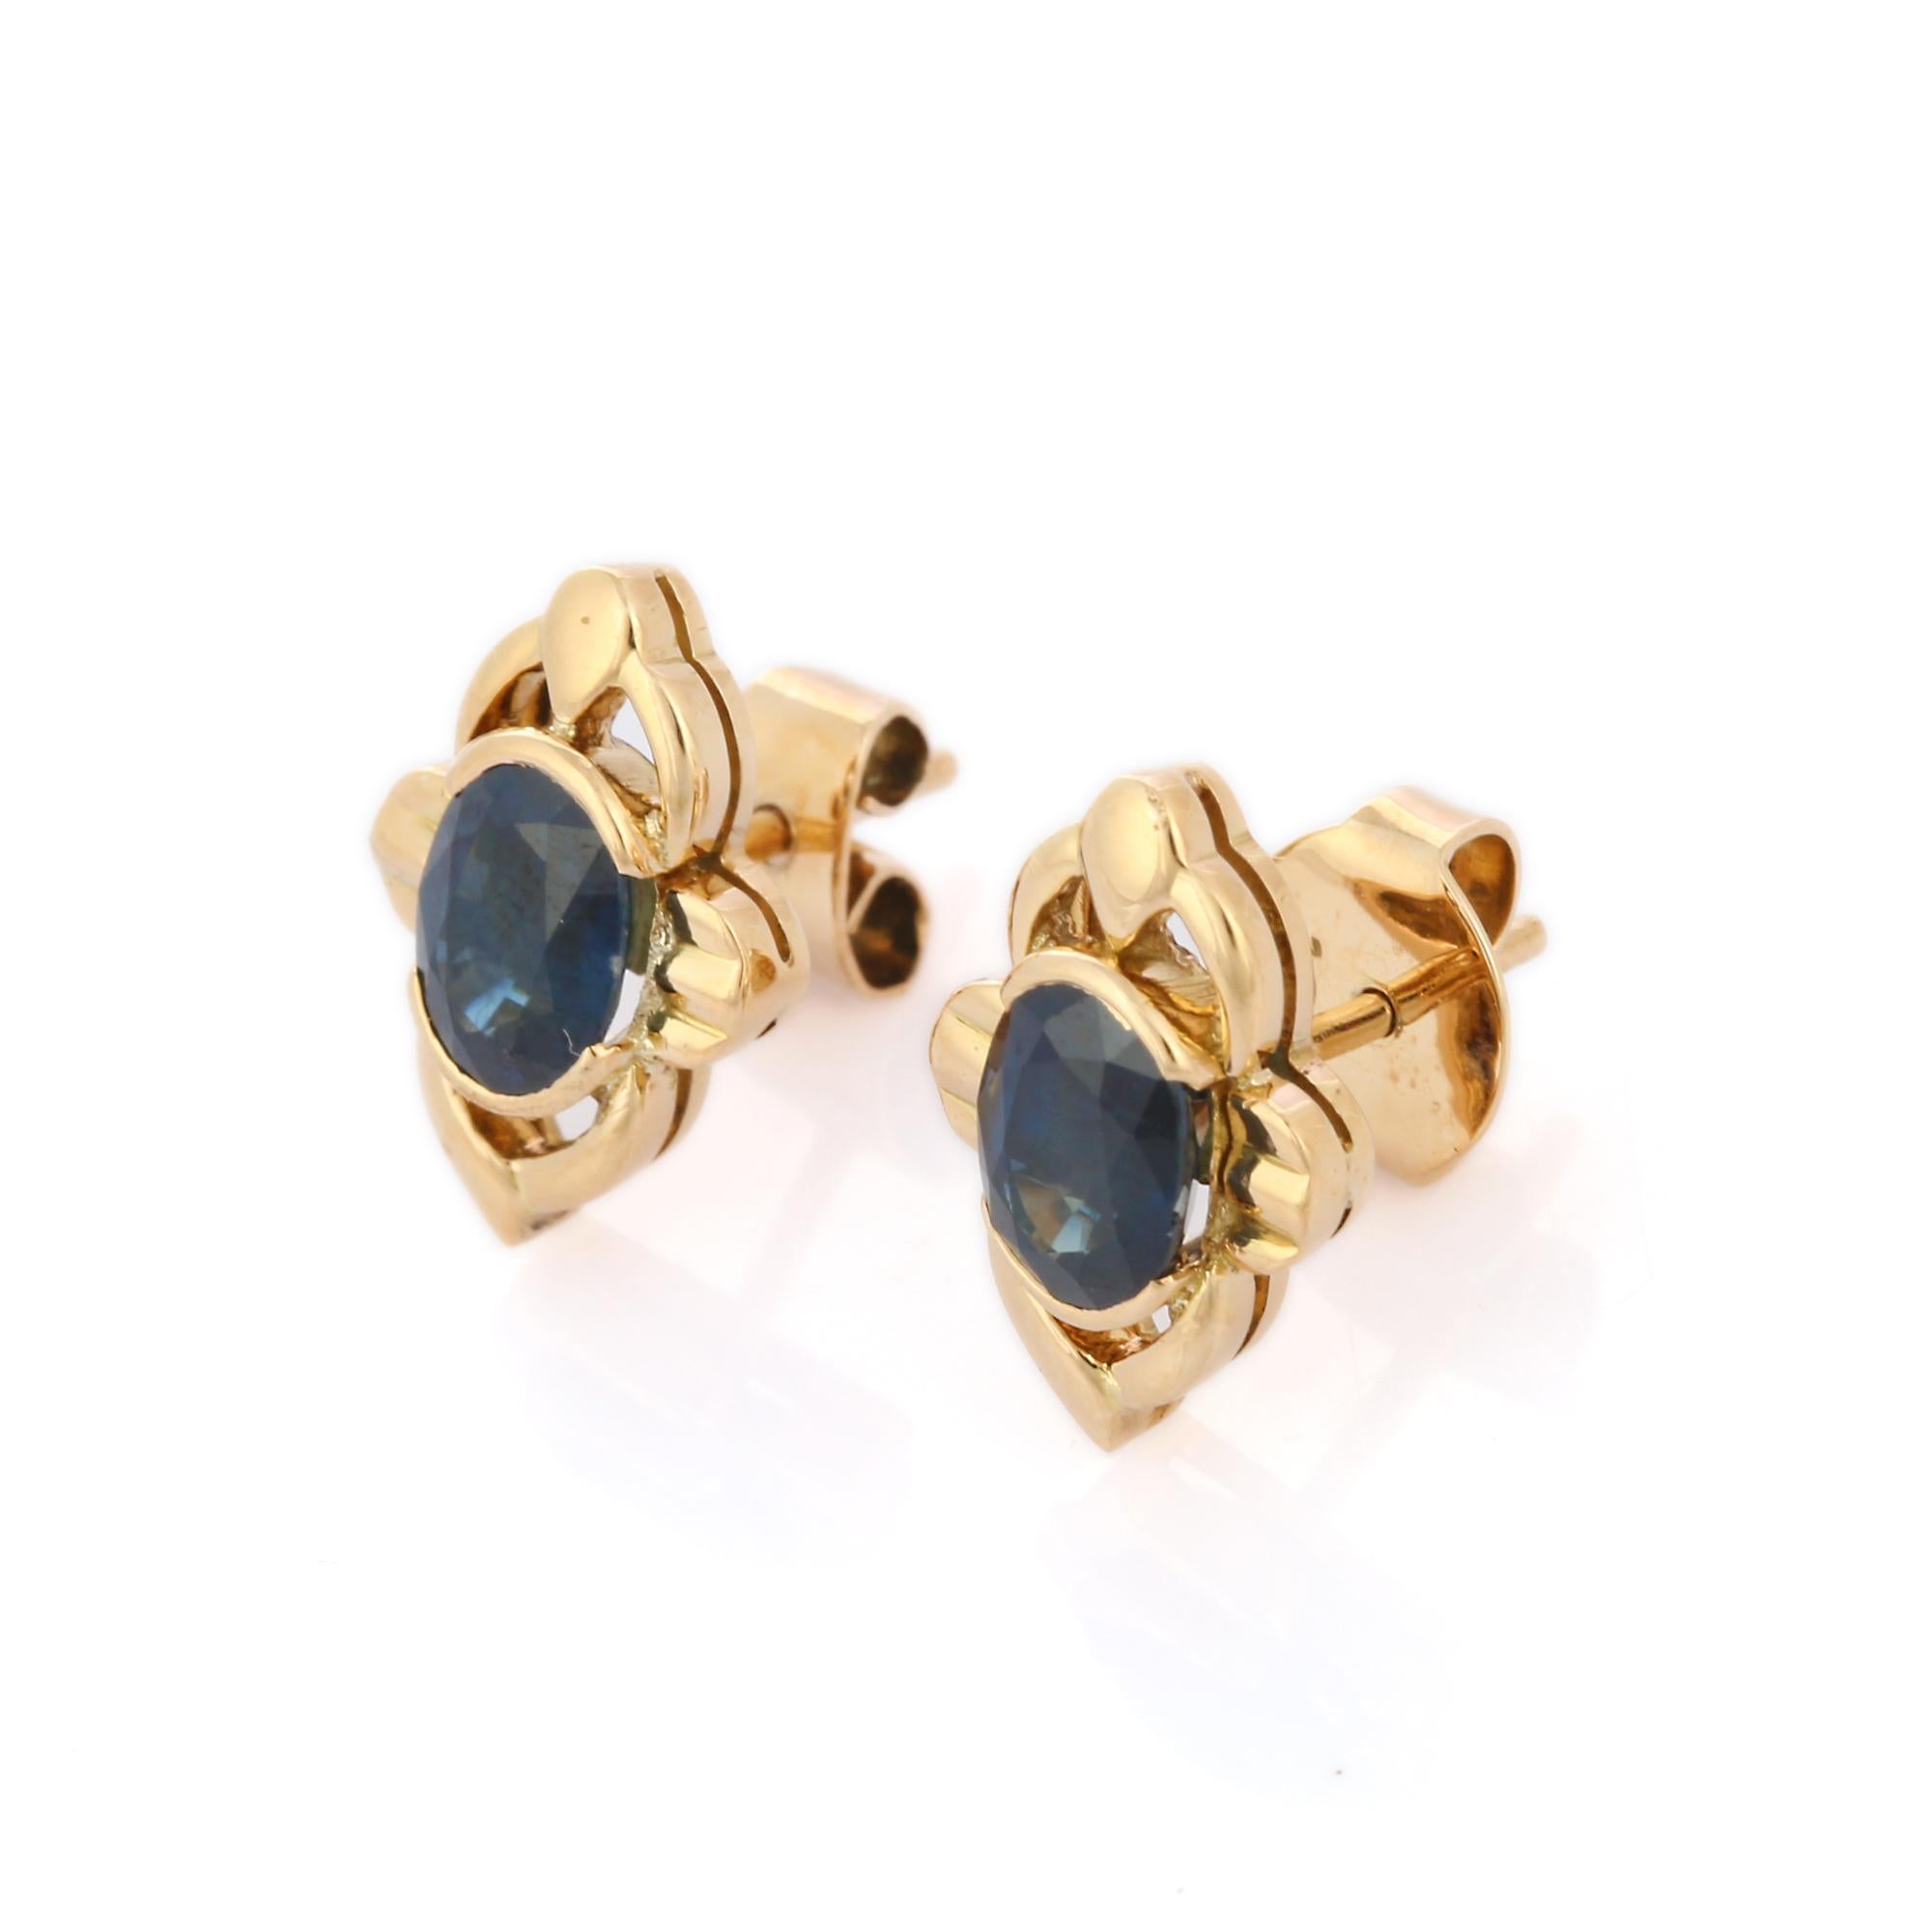 Earrings create a subtle beauty while showcasing the colors of the natural precious gemstones and illuminating diamonds making a statement.

Oval cut blue sapphire earrings in 18K gold. Embrace your look with these stunning pair of earrings suitable